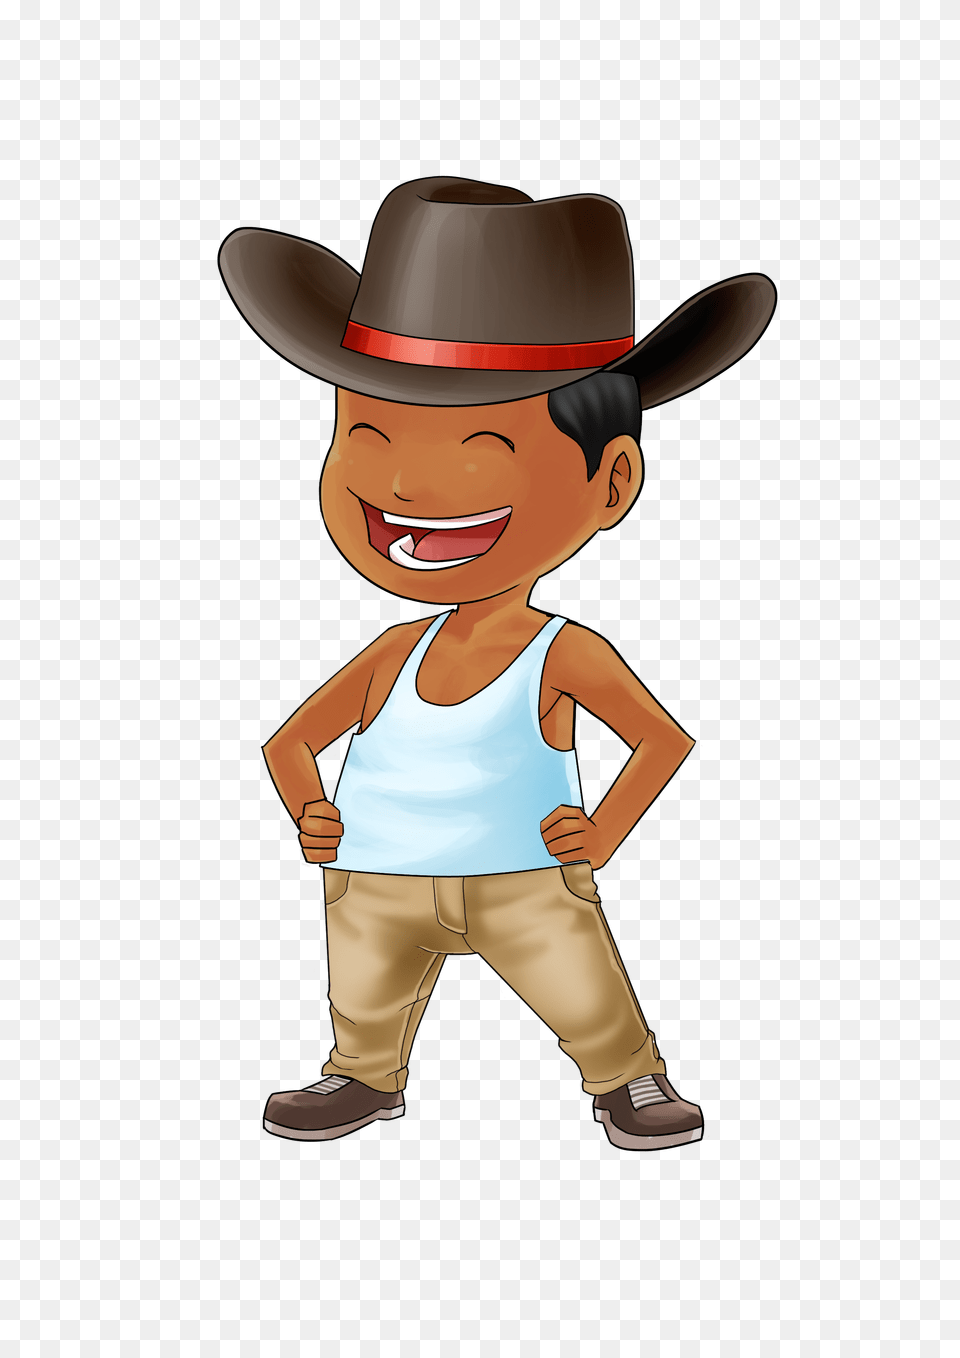 Clip Art The Absolute Truth, Clothing, Hat, Cowboy Hat, Baby Png Image